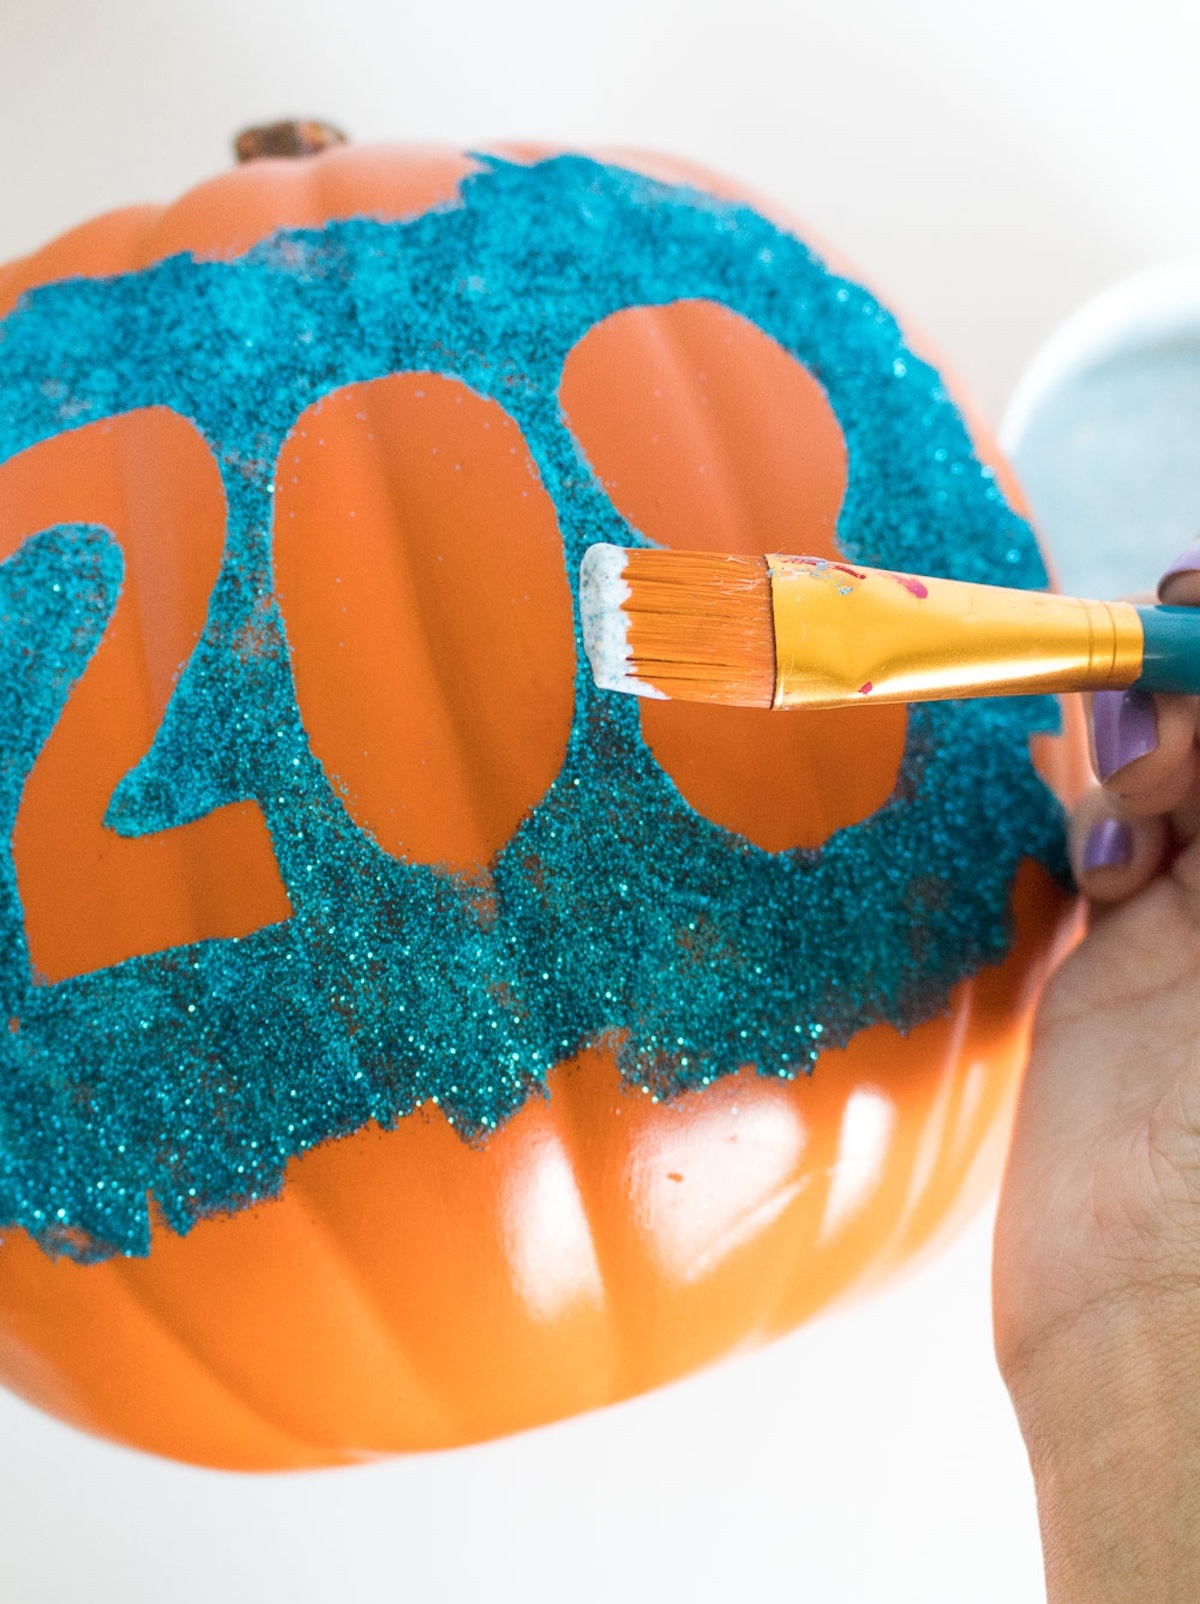 sealing the top o fthe glitter on the pumpkin with Mod Podge